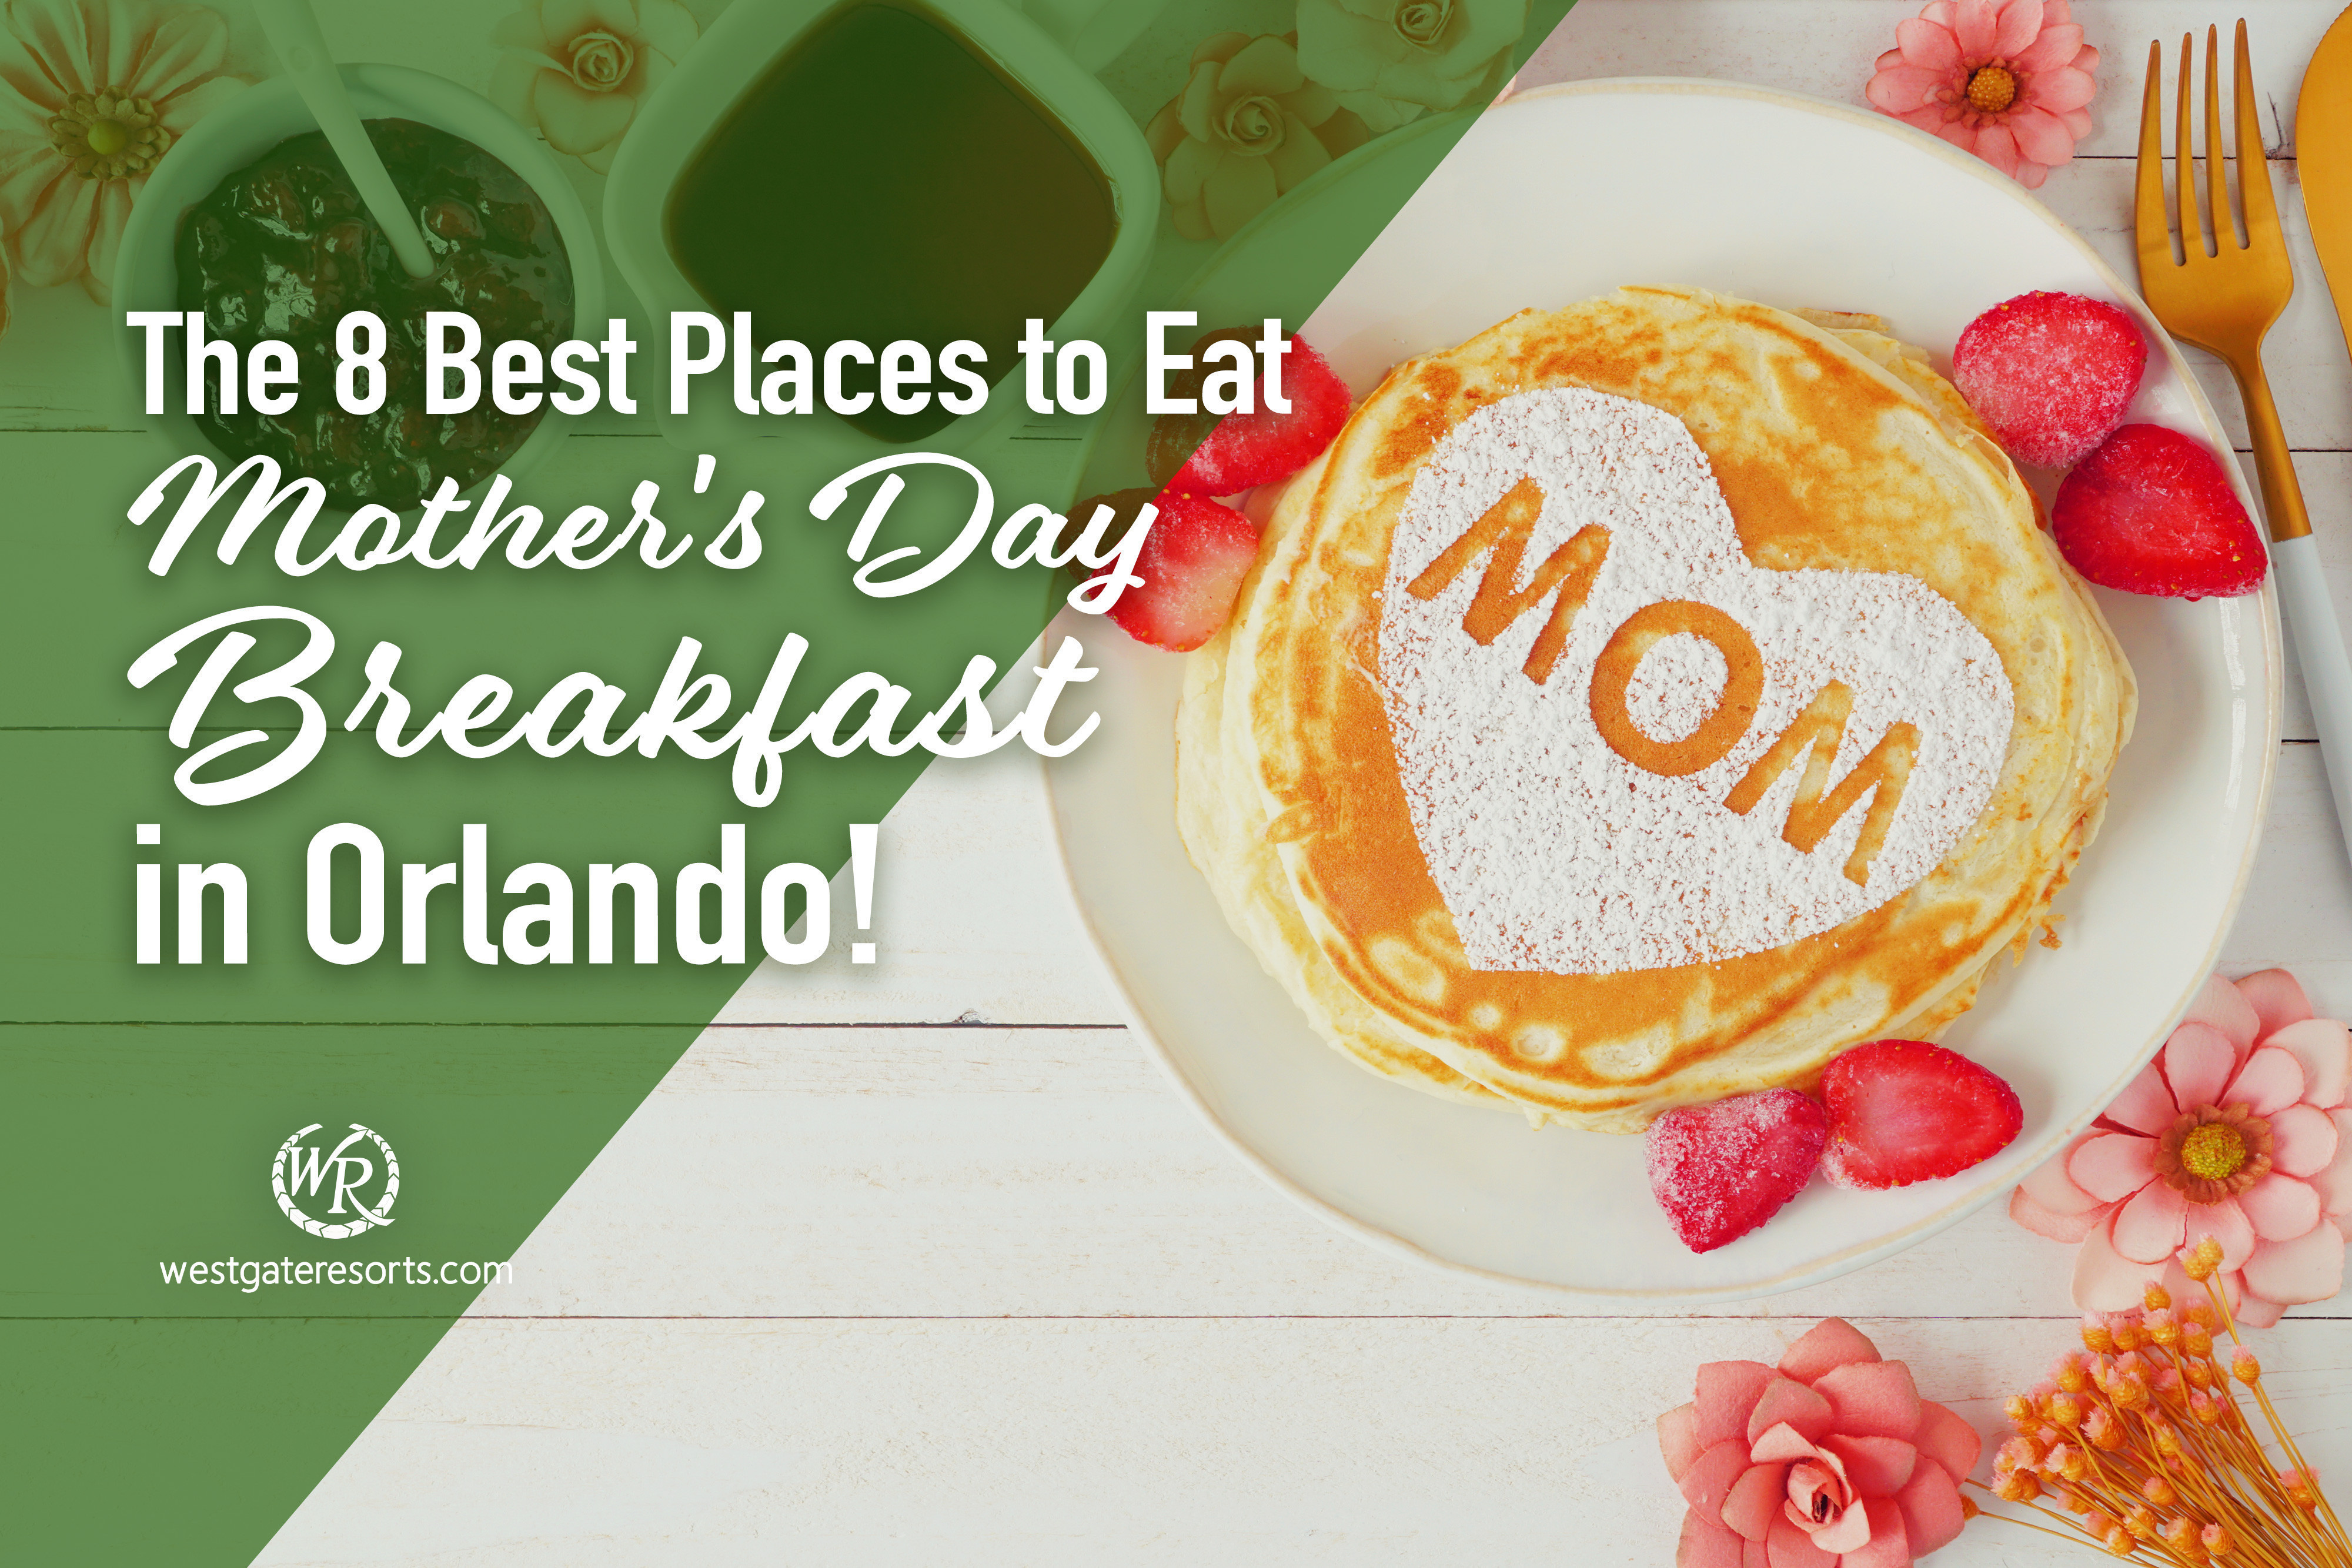 The 8 Best Places to Eat Mother's Day Breakfast in Orlando!